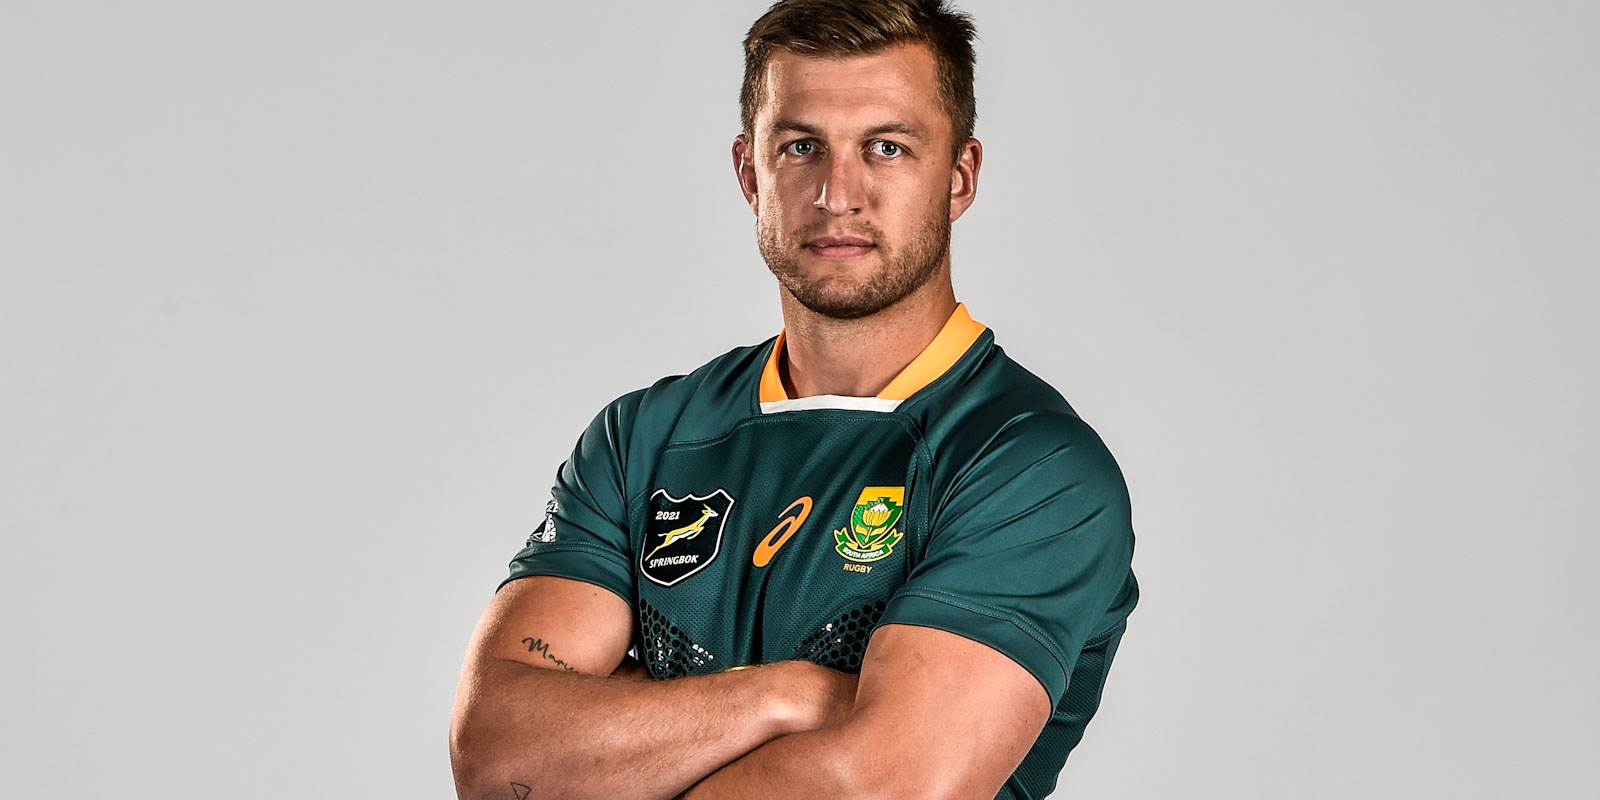 Handre Pollard made his Test debut in 2014, shortly after he played his last game for the Junior Springboks.